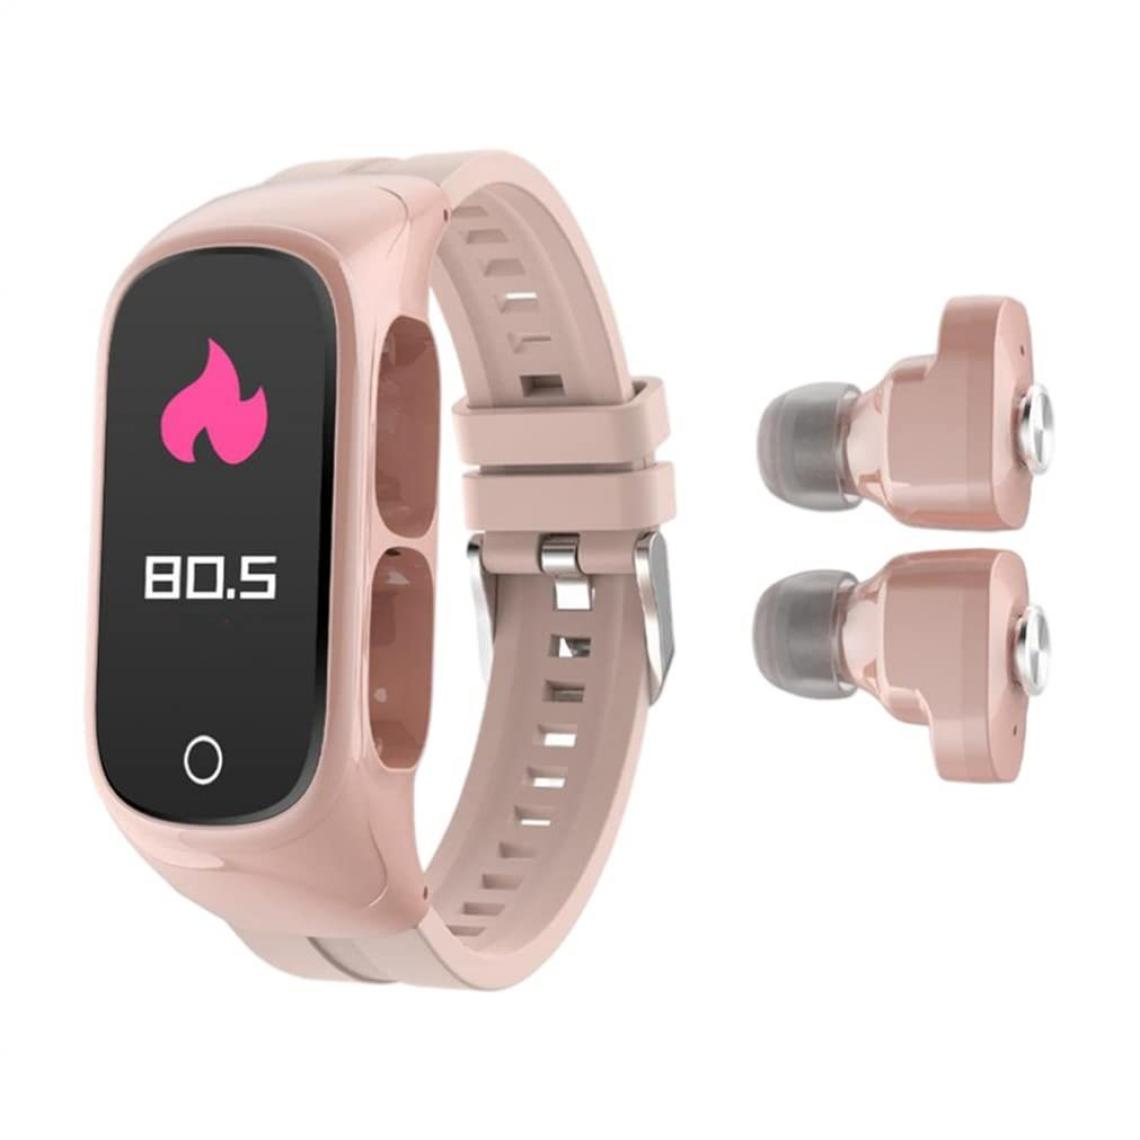 Chronotech Montres - Smart Watch Wireless Headphones 2 in 1 Fitness Tracker Wristband TWS Headphones. Applicable to Apple, Android (pink) - Montre connectée